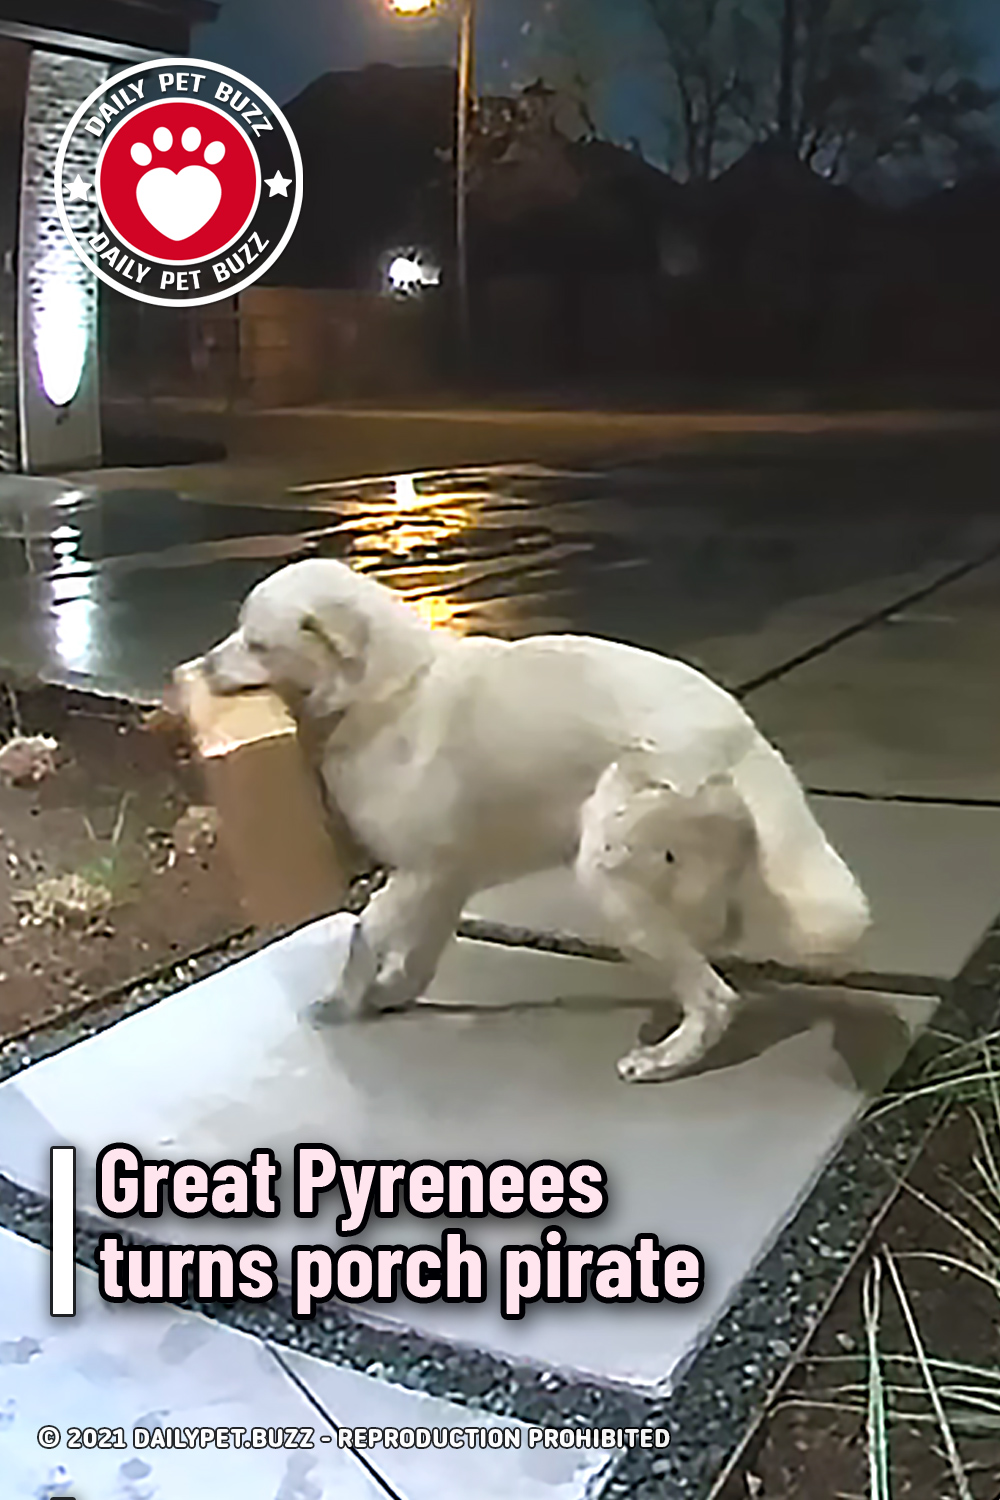 Great Pyrenees turns porch pirate